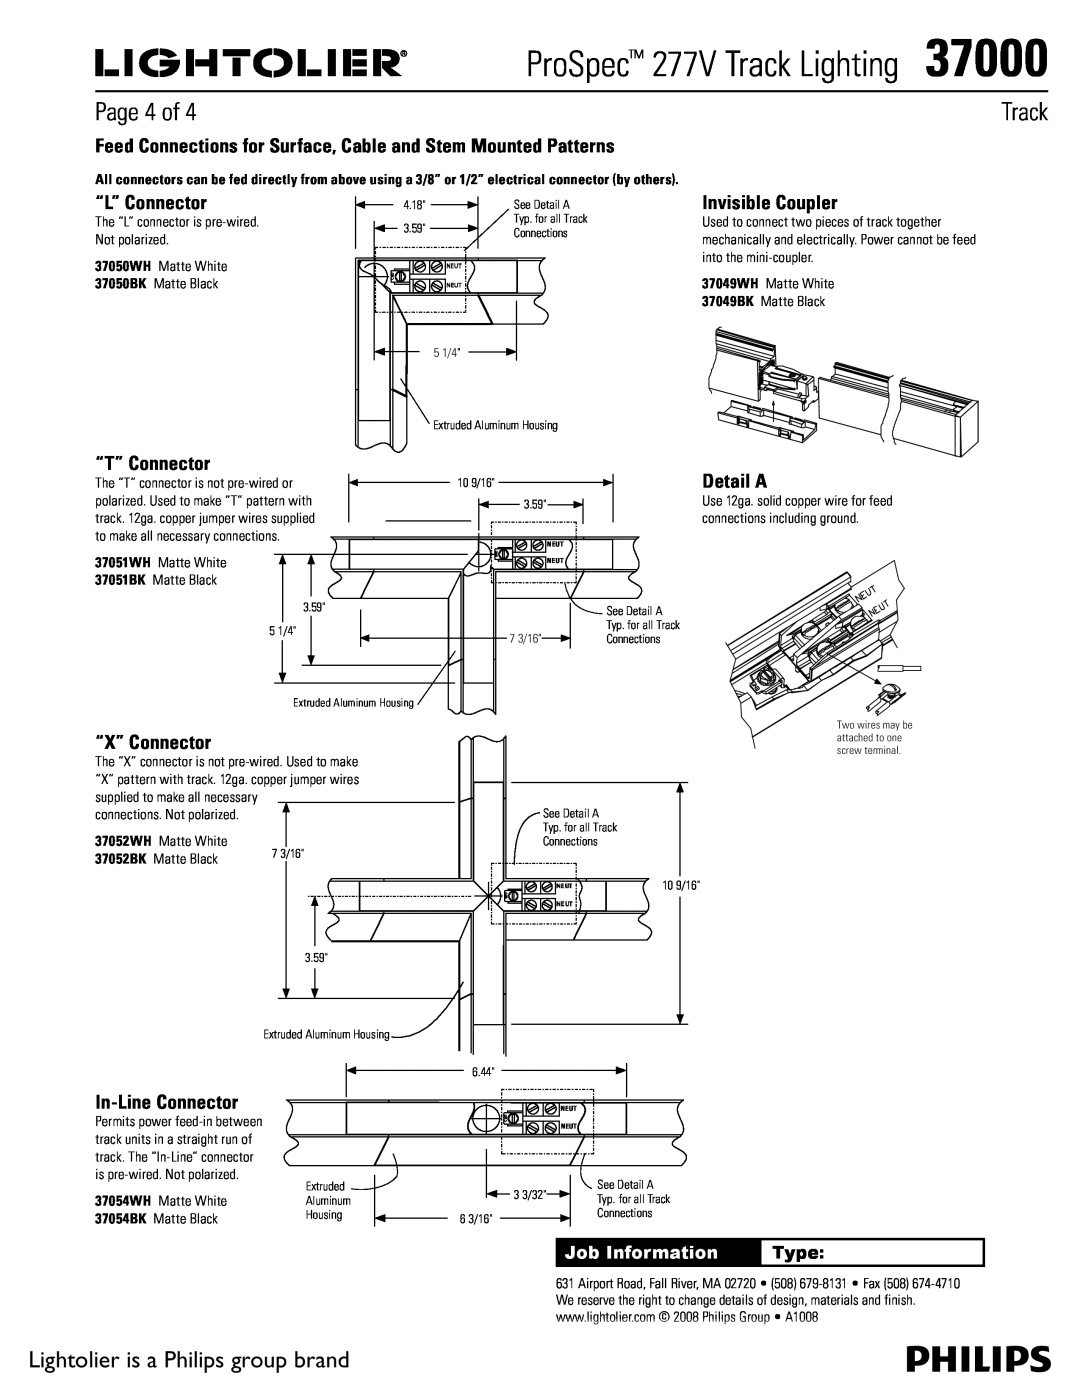 Lightolier 37000 Page 4 of, Feed Connections for Surface, Cable and Stem Mounted Patterns, “L” Connector, “T” Connector 